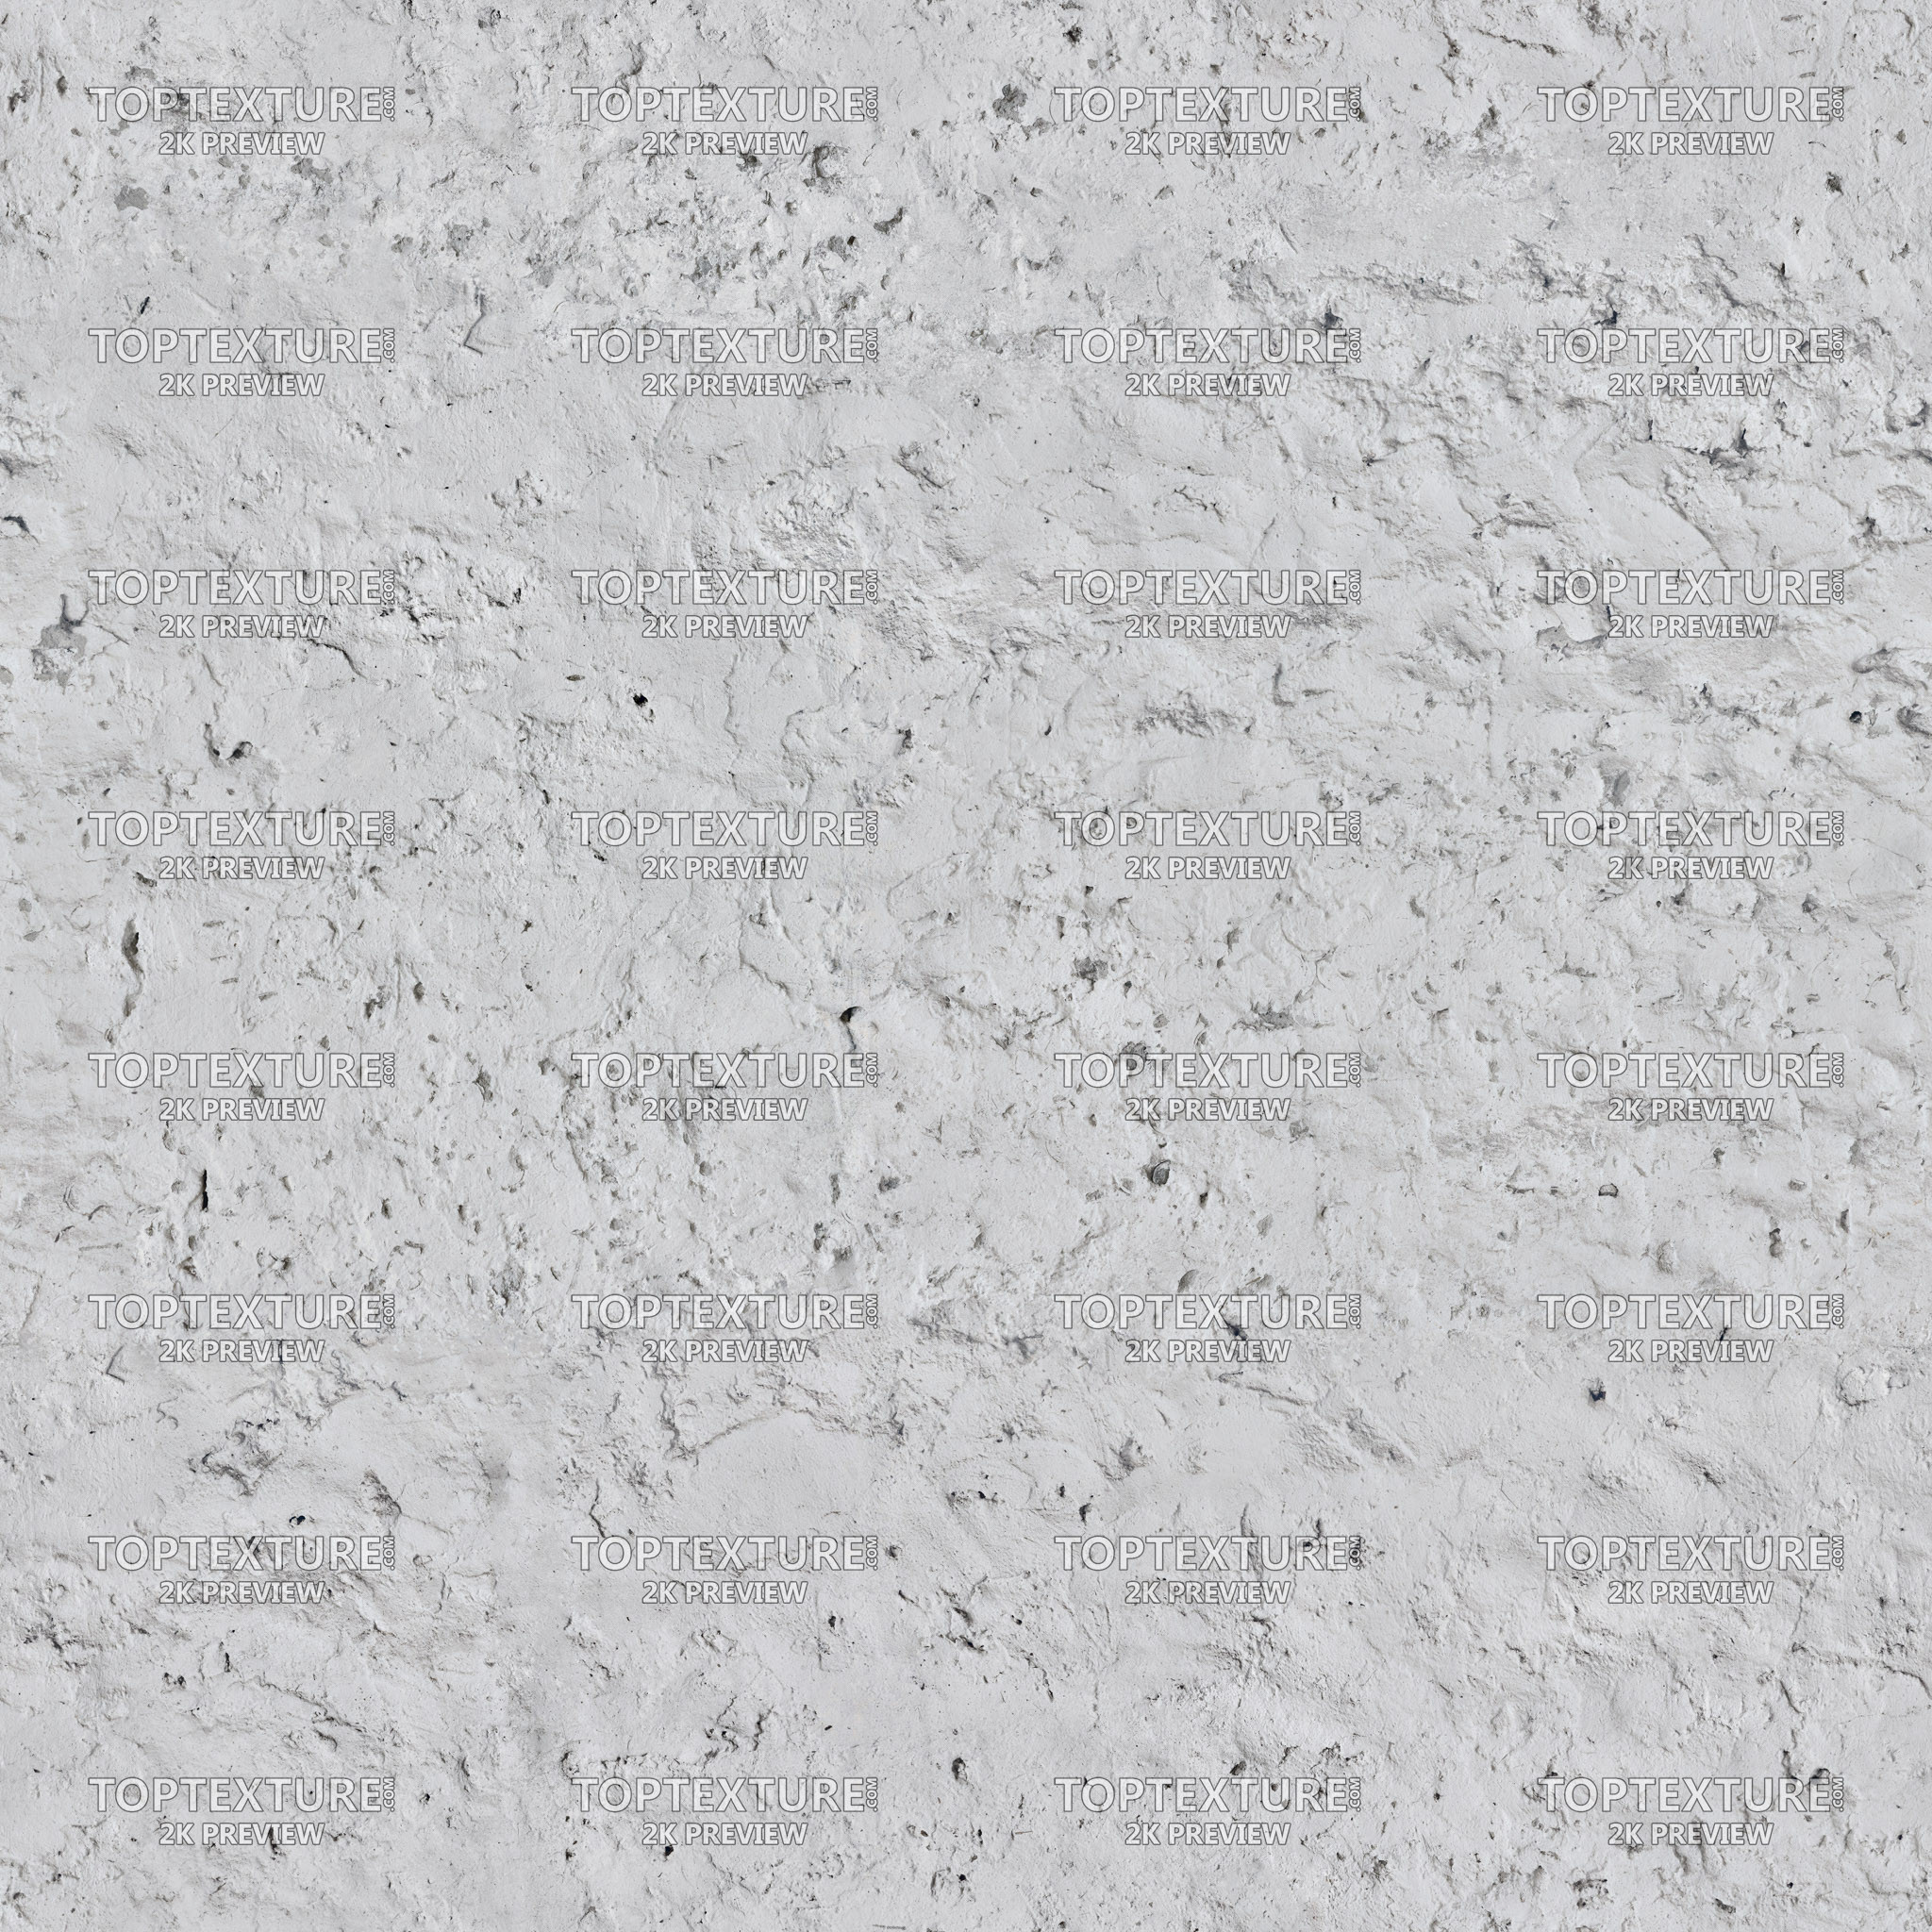 Rough Bumpy White Wall Plaster - Top Texture